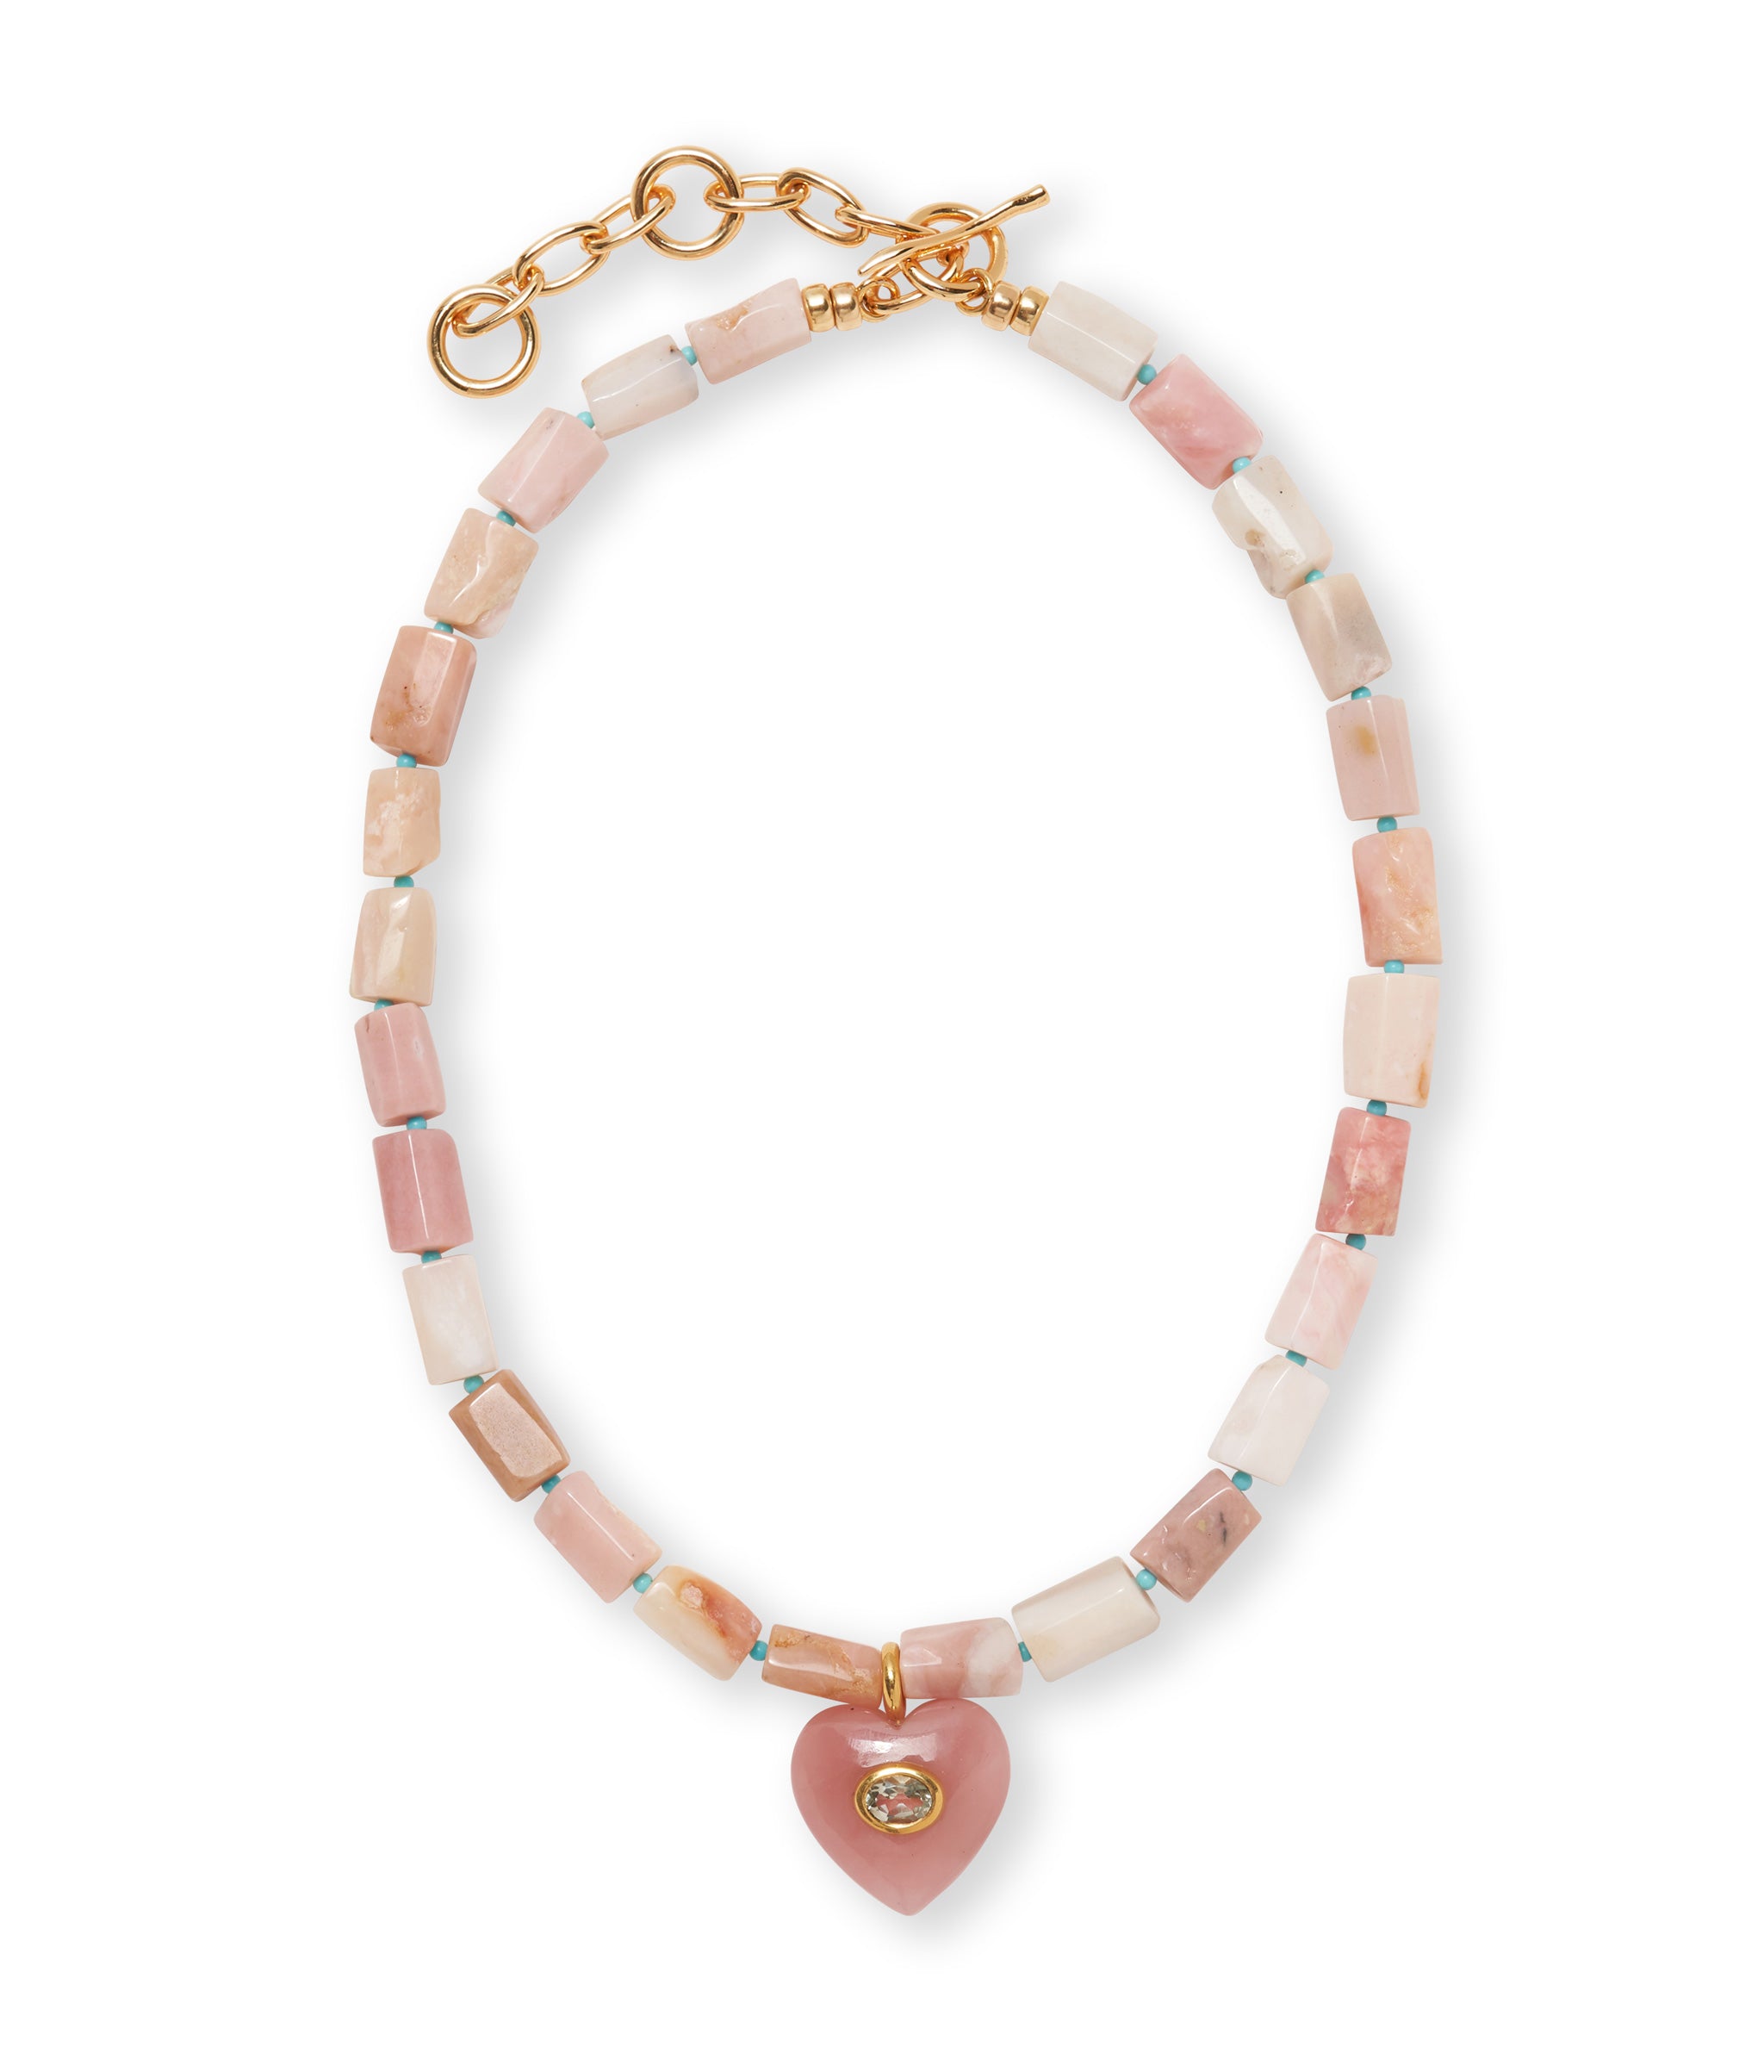 Infatuation Necklace in Guava. Beaded necklace of pink opal and turquoise, guava pink quartz heart with green amethyst.